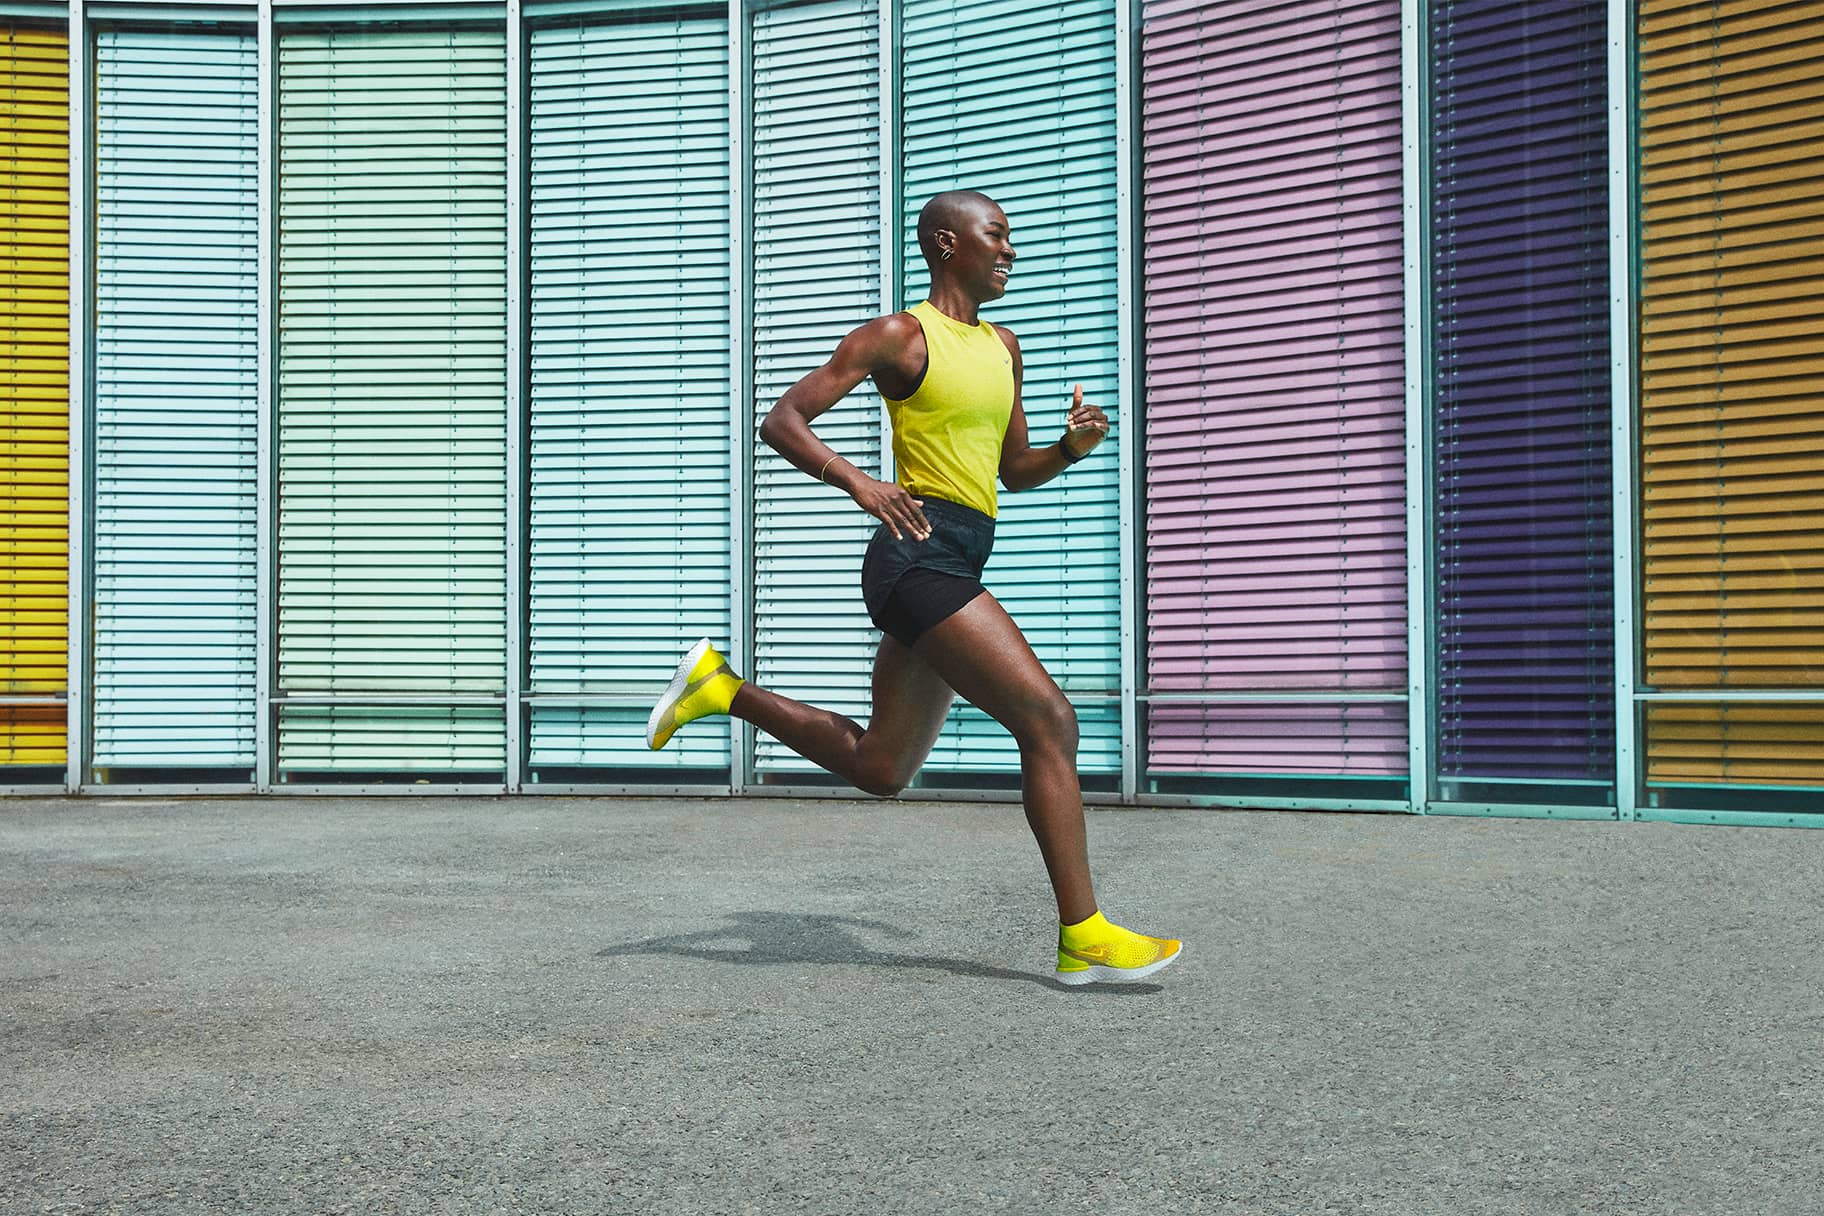 Nike's Best Lightweight Running Shoes for Speed and Performance